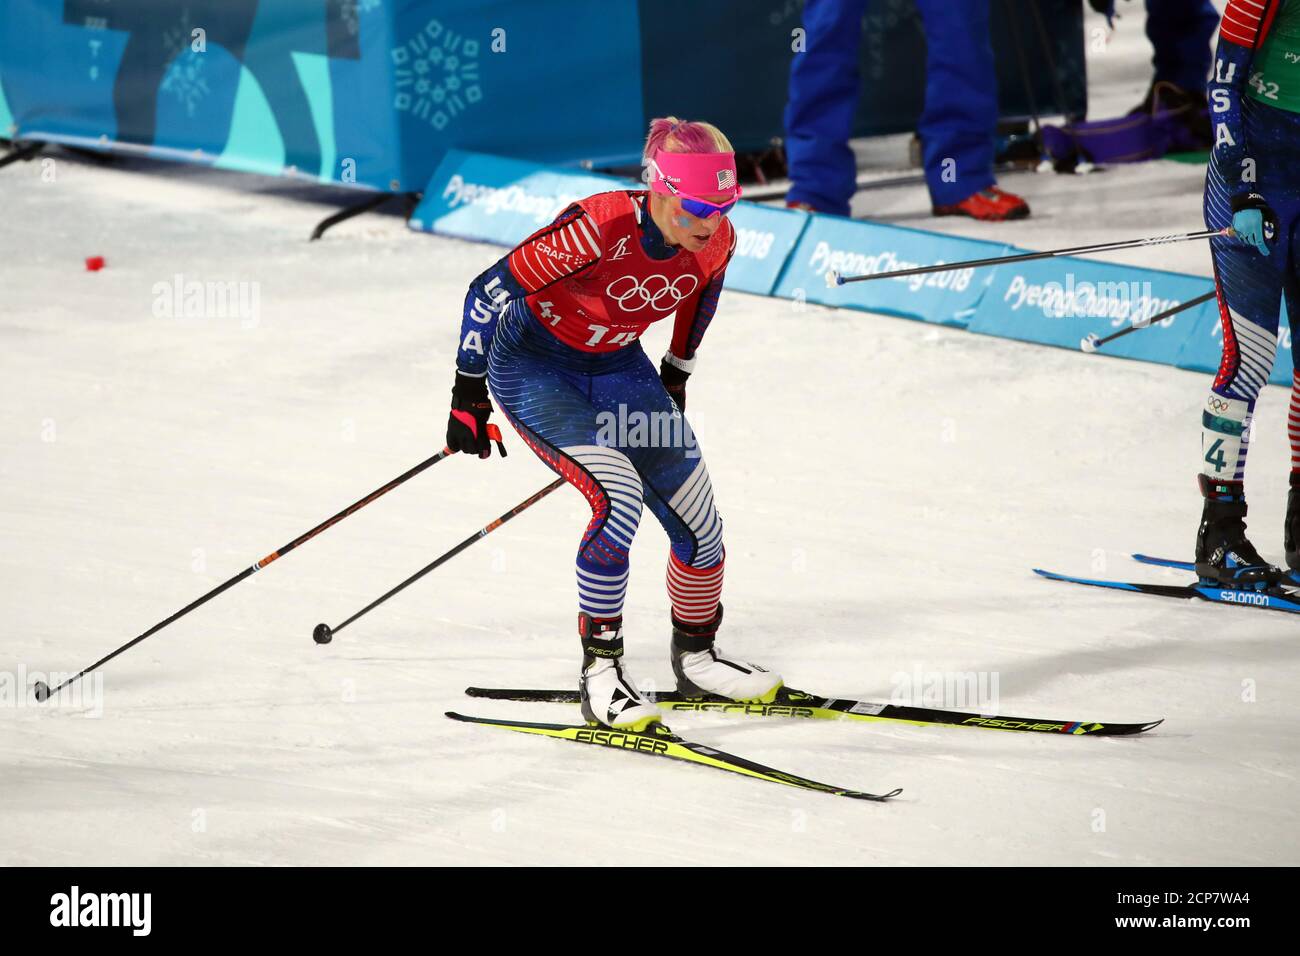 Cross-Country Skiing - Pyeongchang 2018 Winter Olympics - Women's Team Sprint Free Finals - Alpensia Cross-Country Skiing Centre - Pyeongchang, South Korea - February 21, 2018 - Kikkan Randall of the U.S. competes. Picture taken February 21, 2018. REUTERS/Carlos Barria Stock Photo